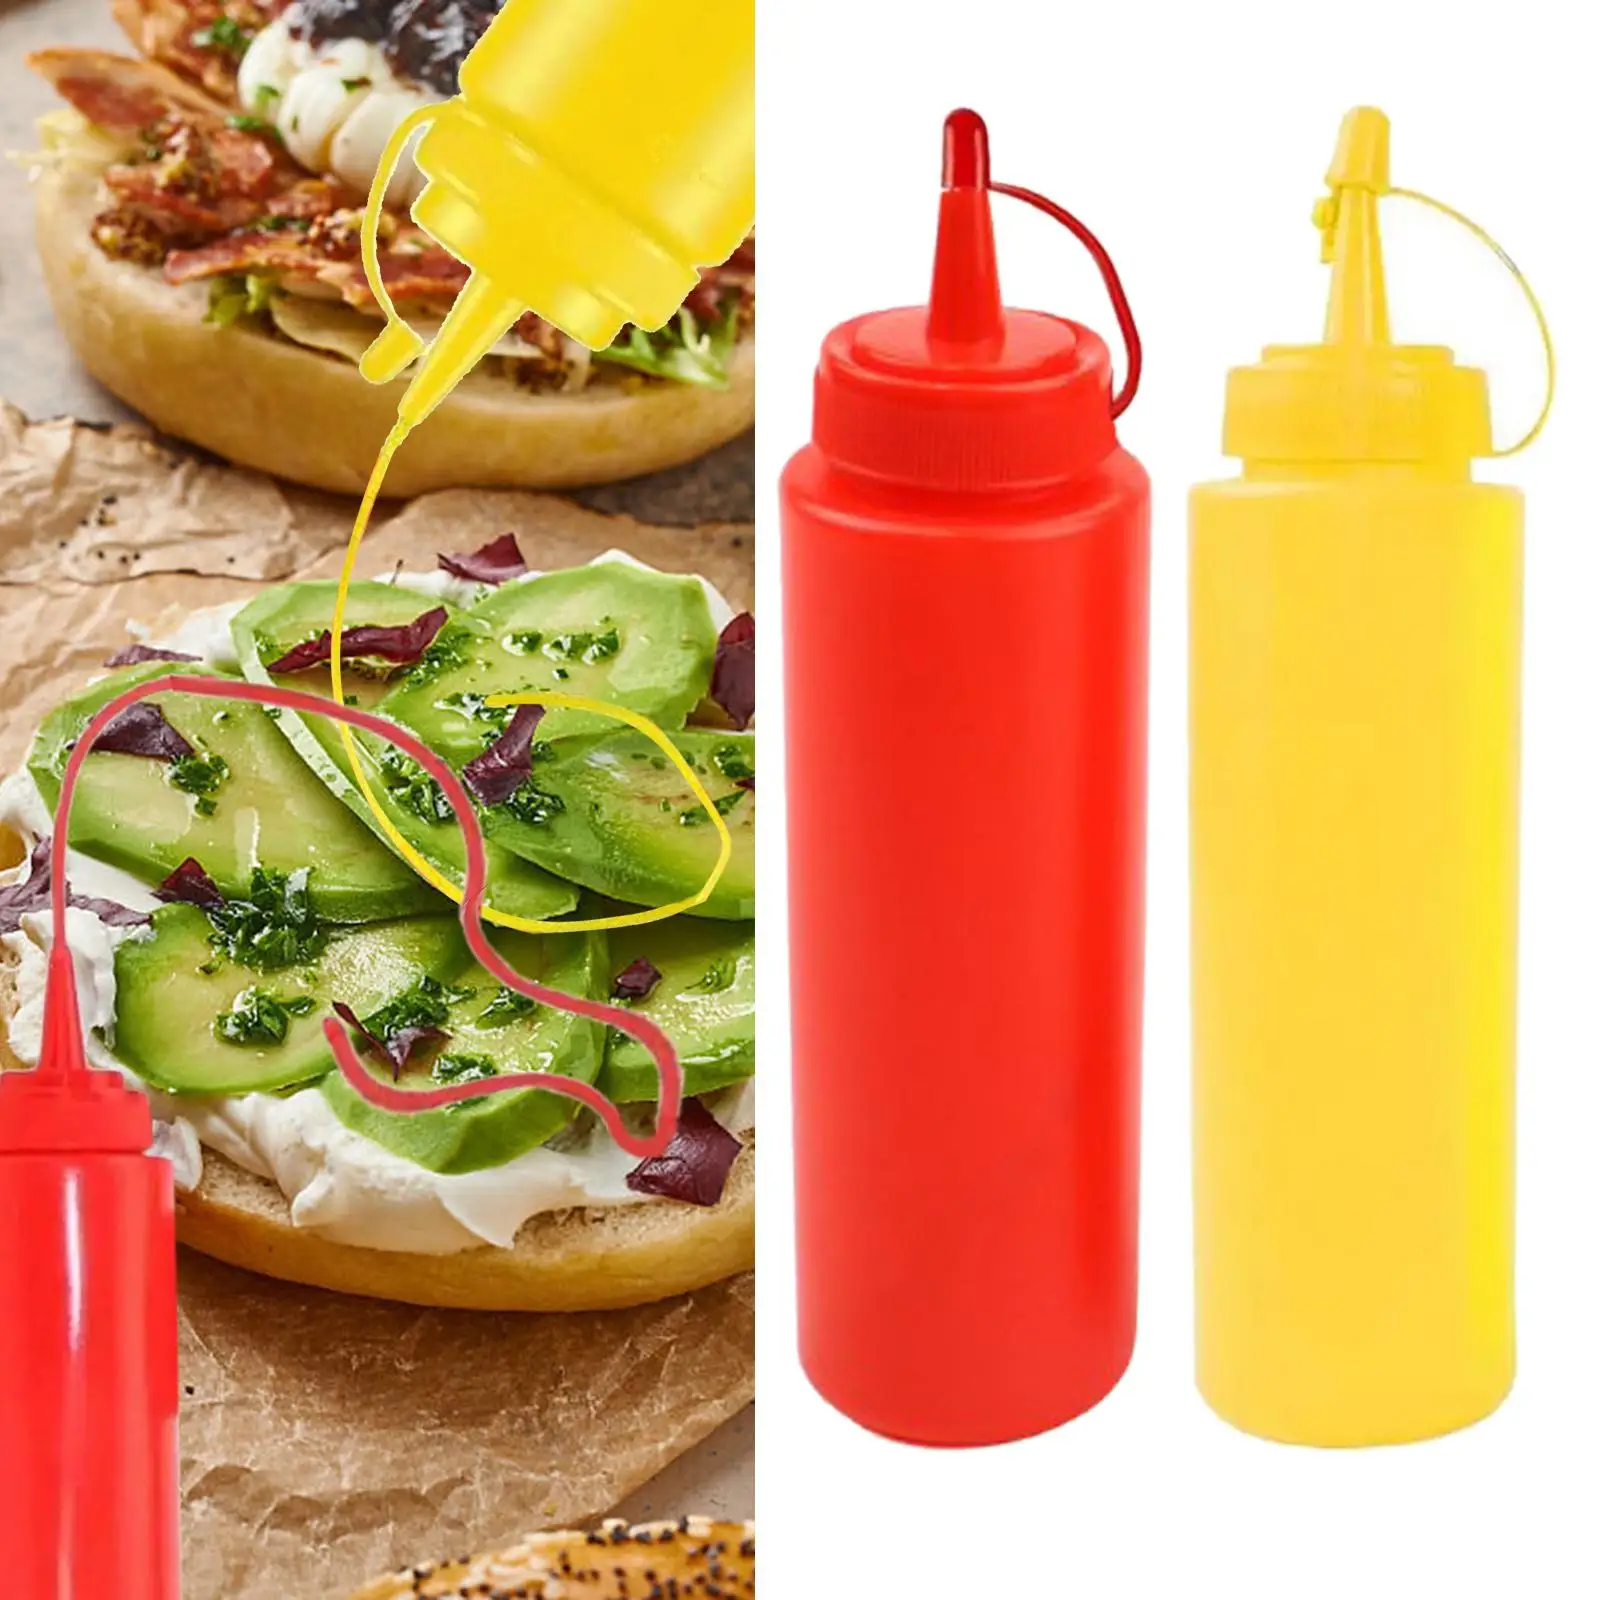 Fake Squirt Bottles Novelty Fake Squirt Ketchup and Mustard Bottle Practical Joke Toy for Carnival Party Festival Family